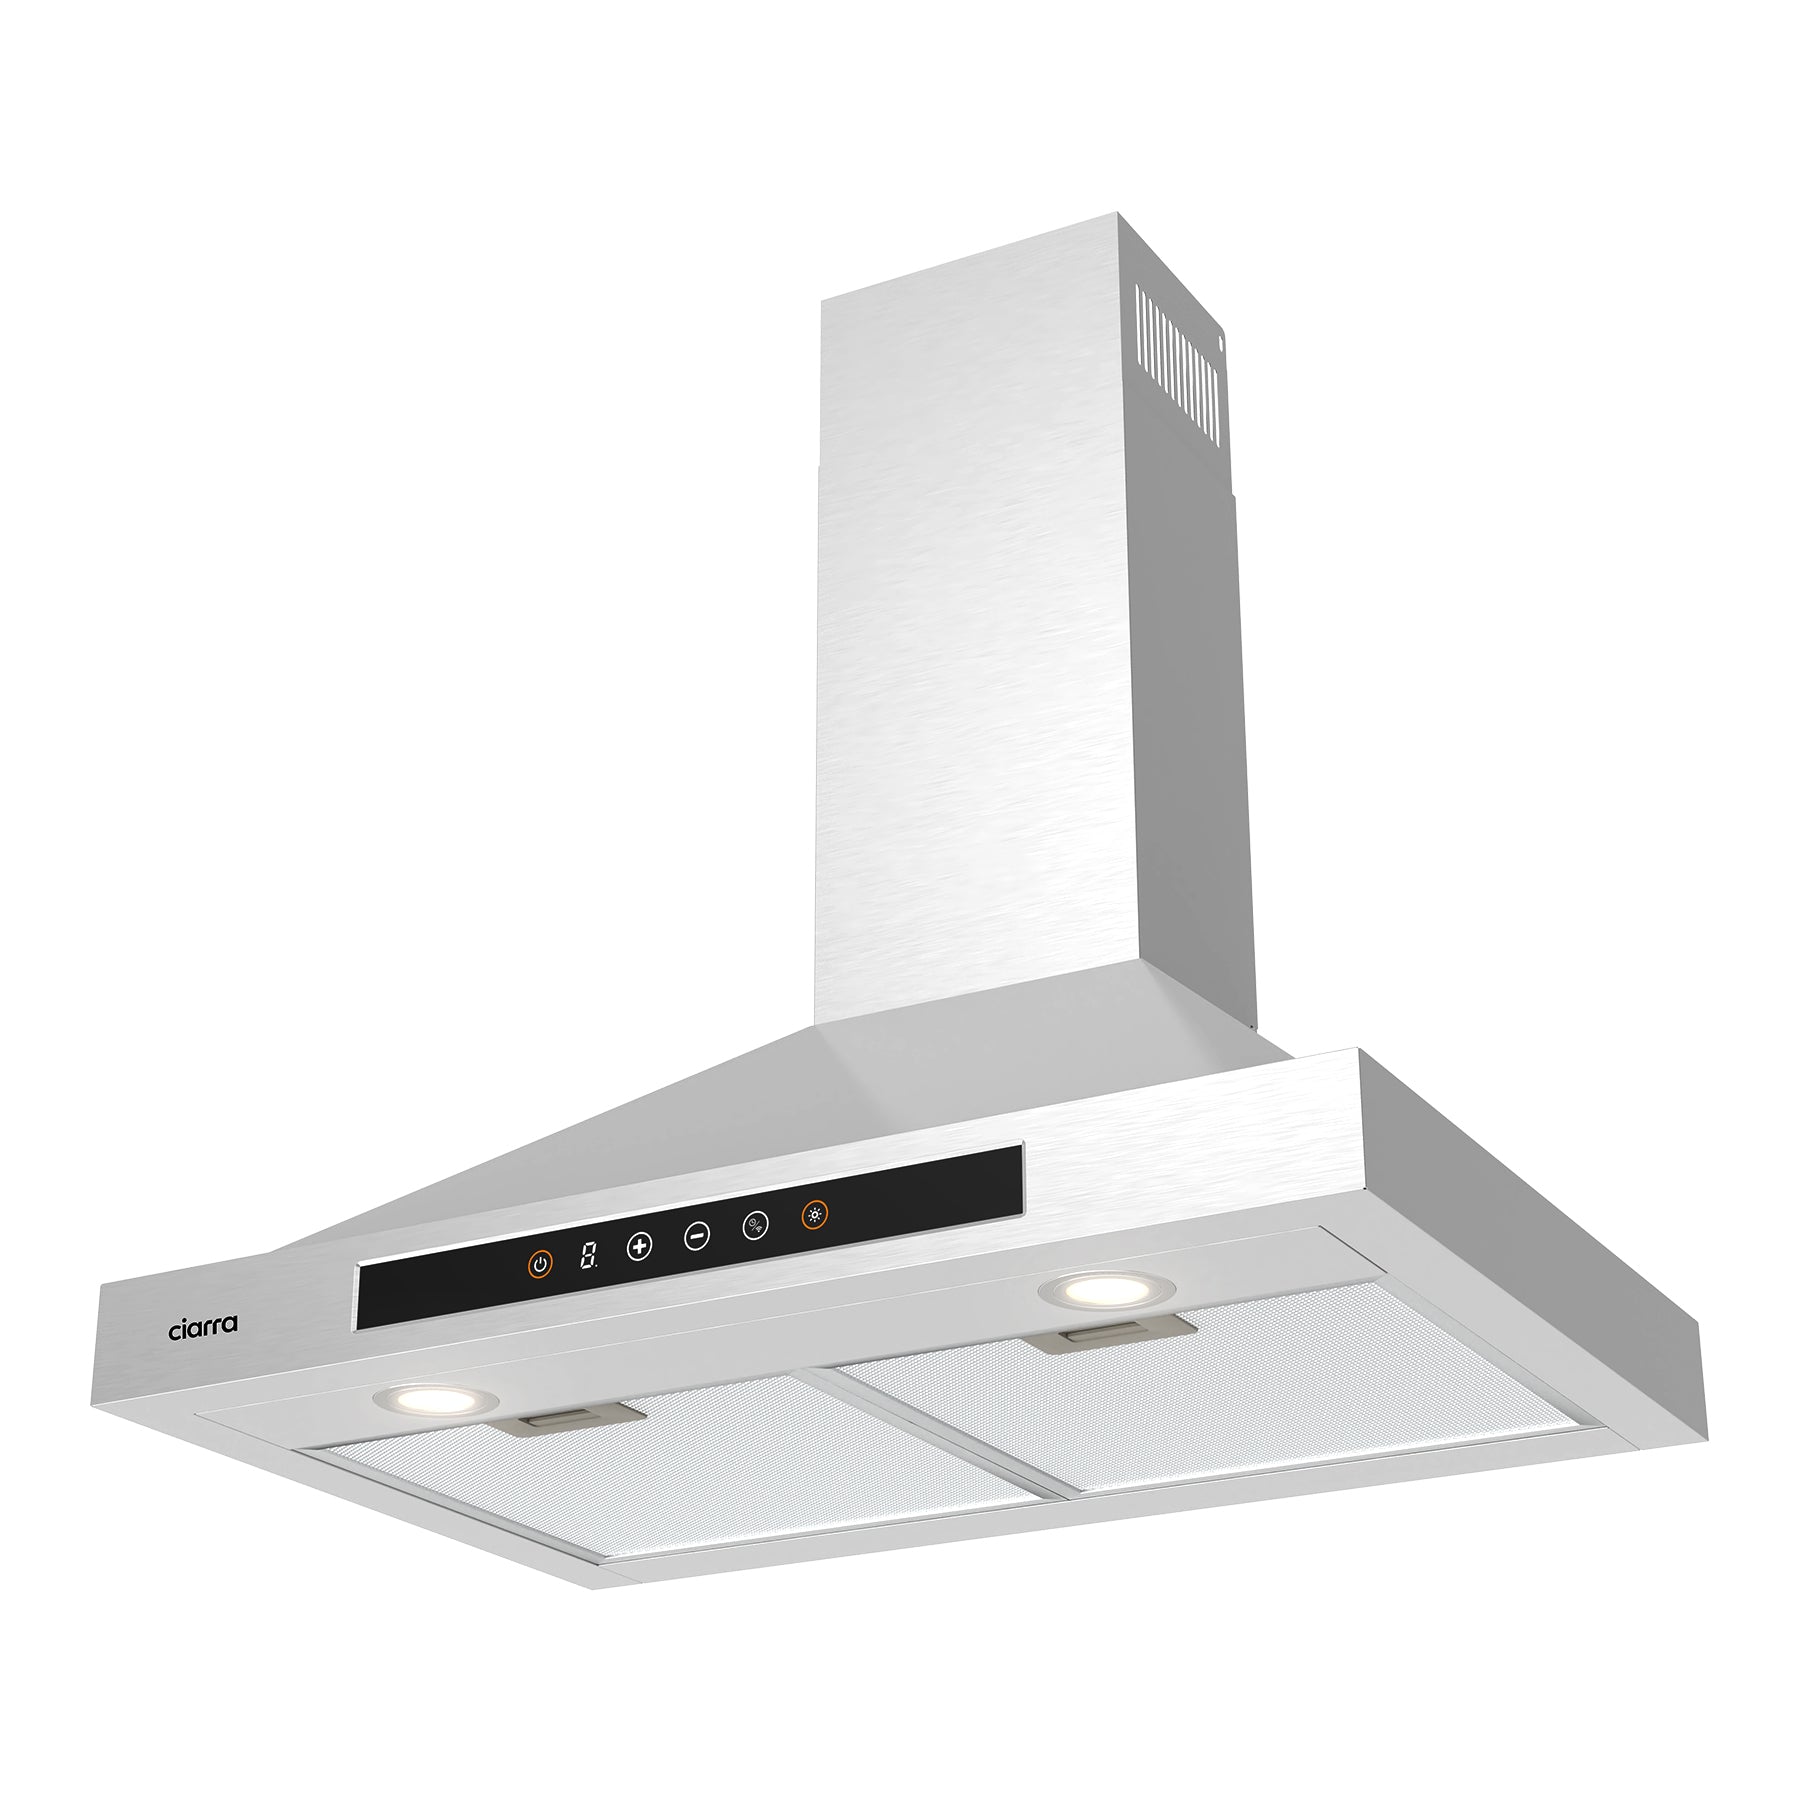  CIARRA Black Range Hood 30 inch with Soft Touch